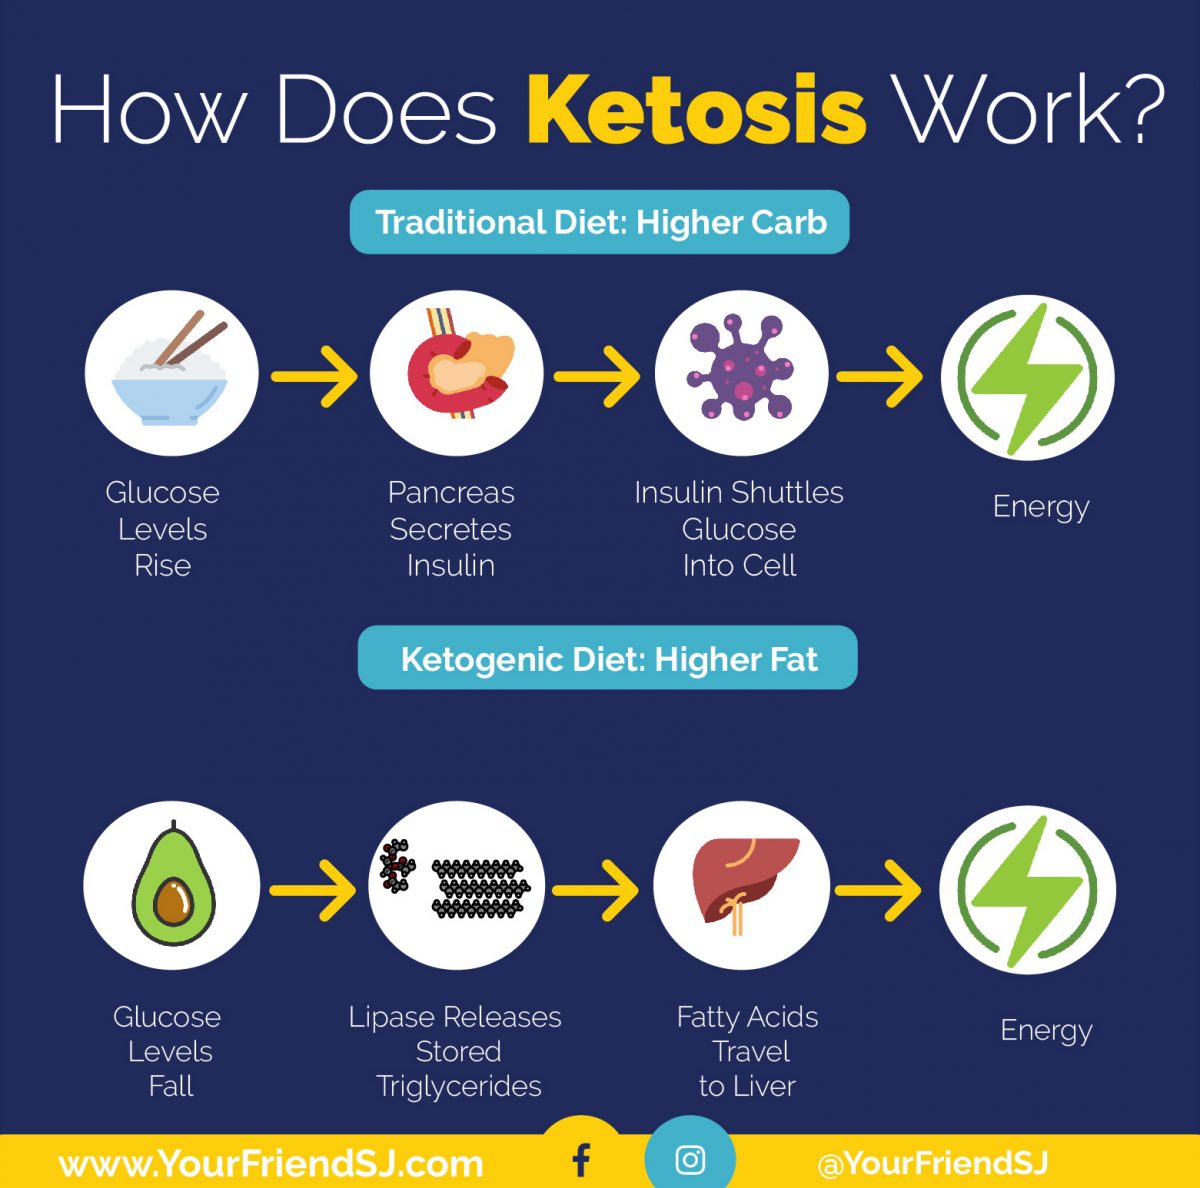 How Does Ketosis Work Infographic - Keto For Dummies